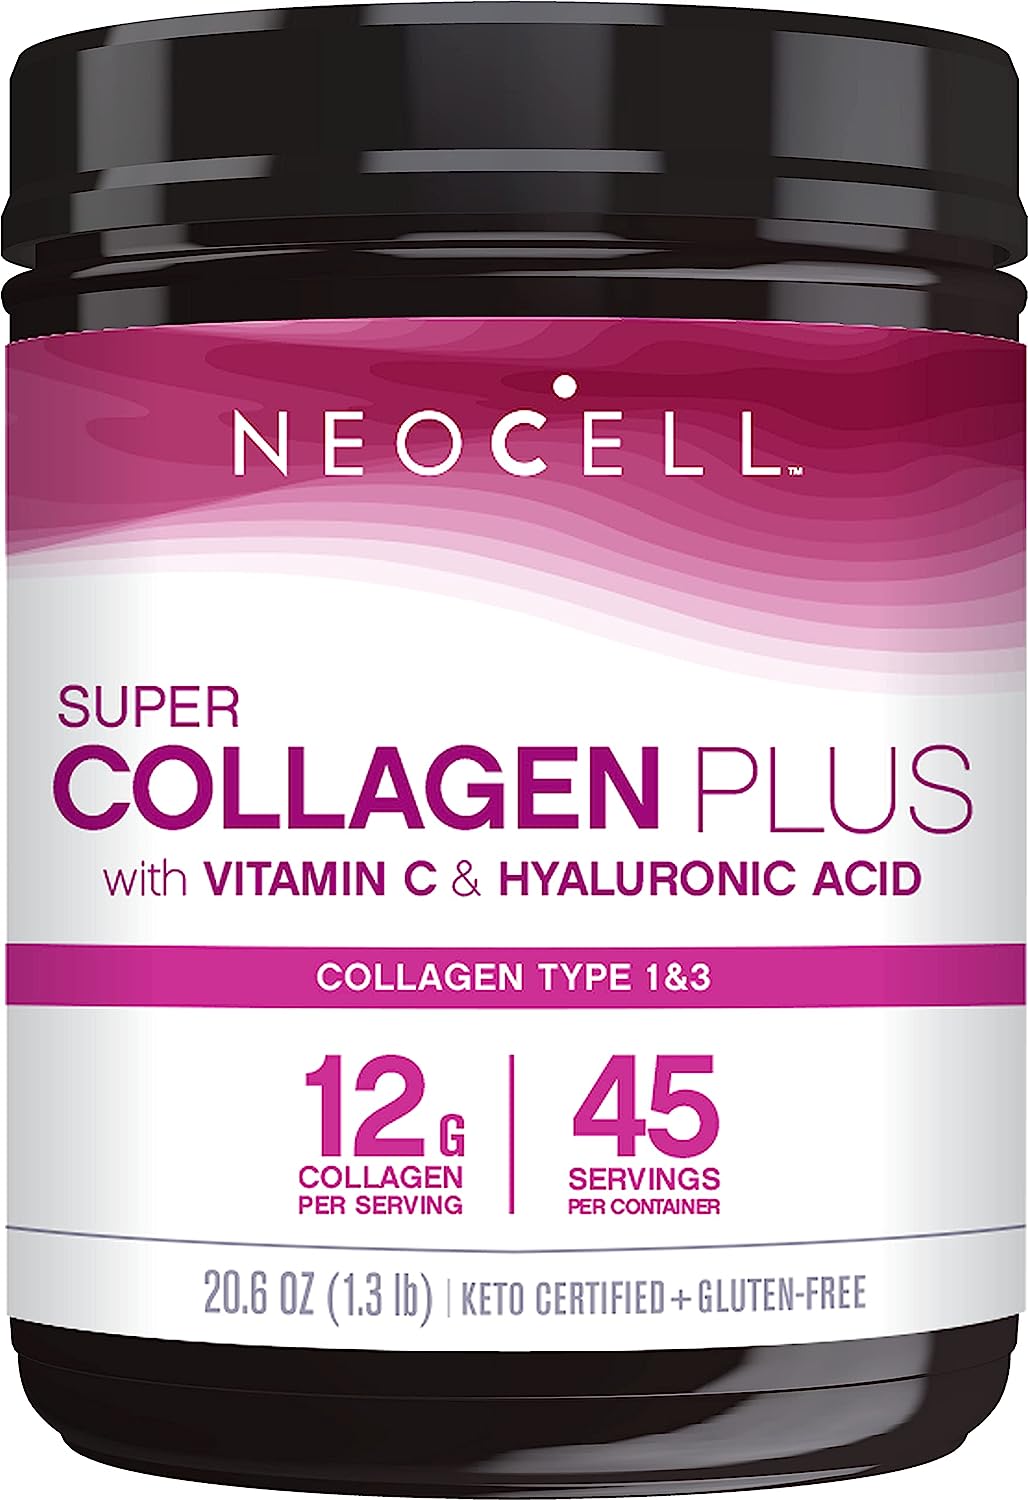 NeoCell Super Collagen Plus with Vitamin C and Hyaluronic Acid